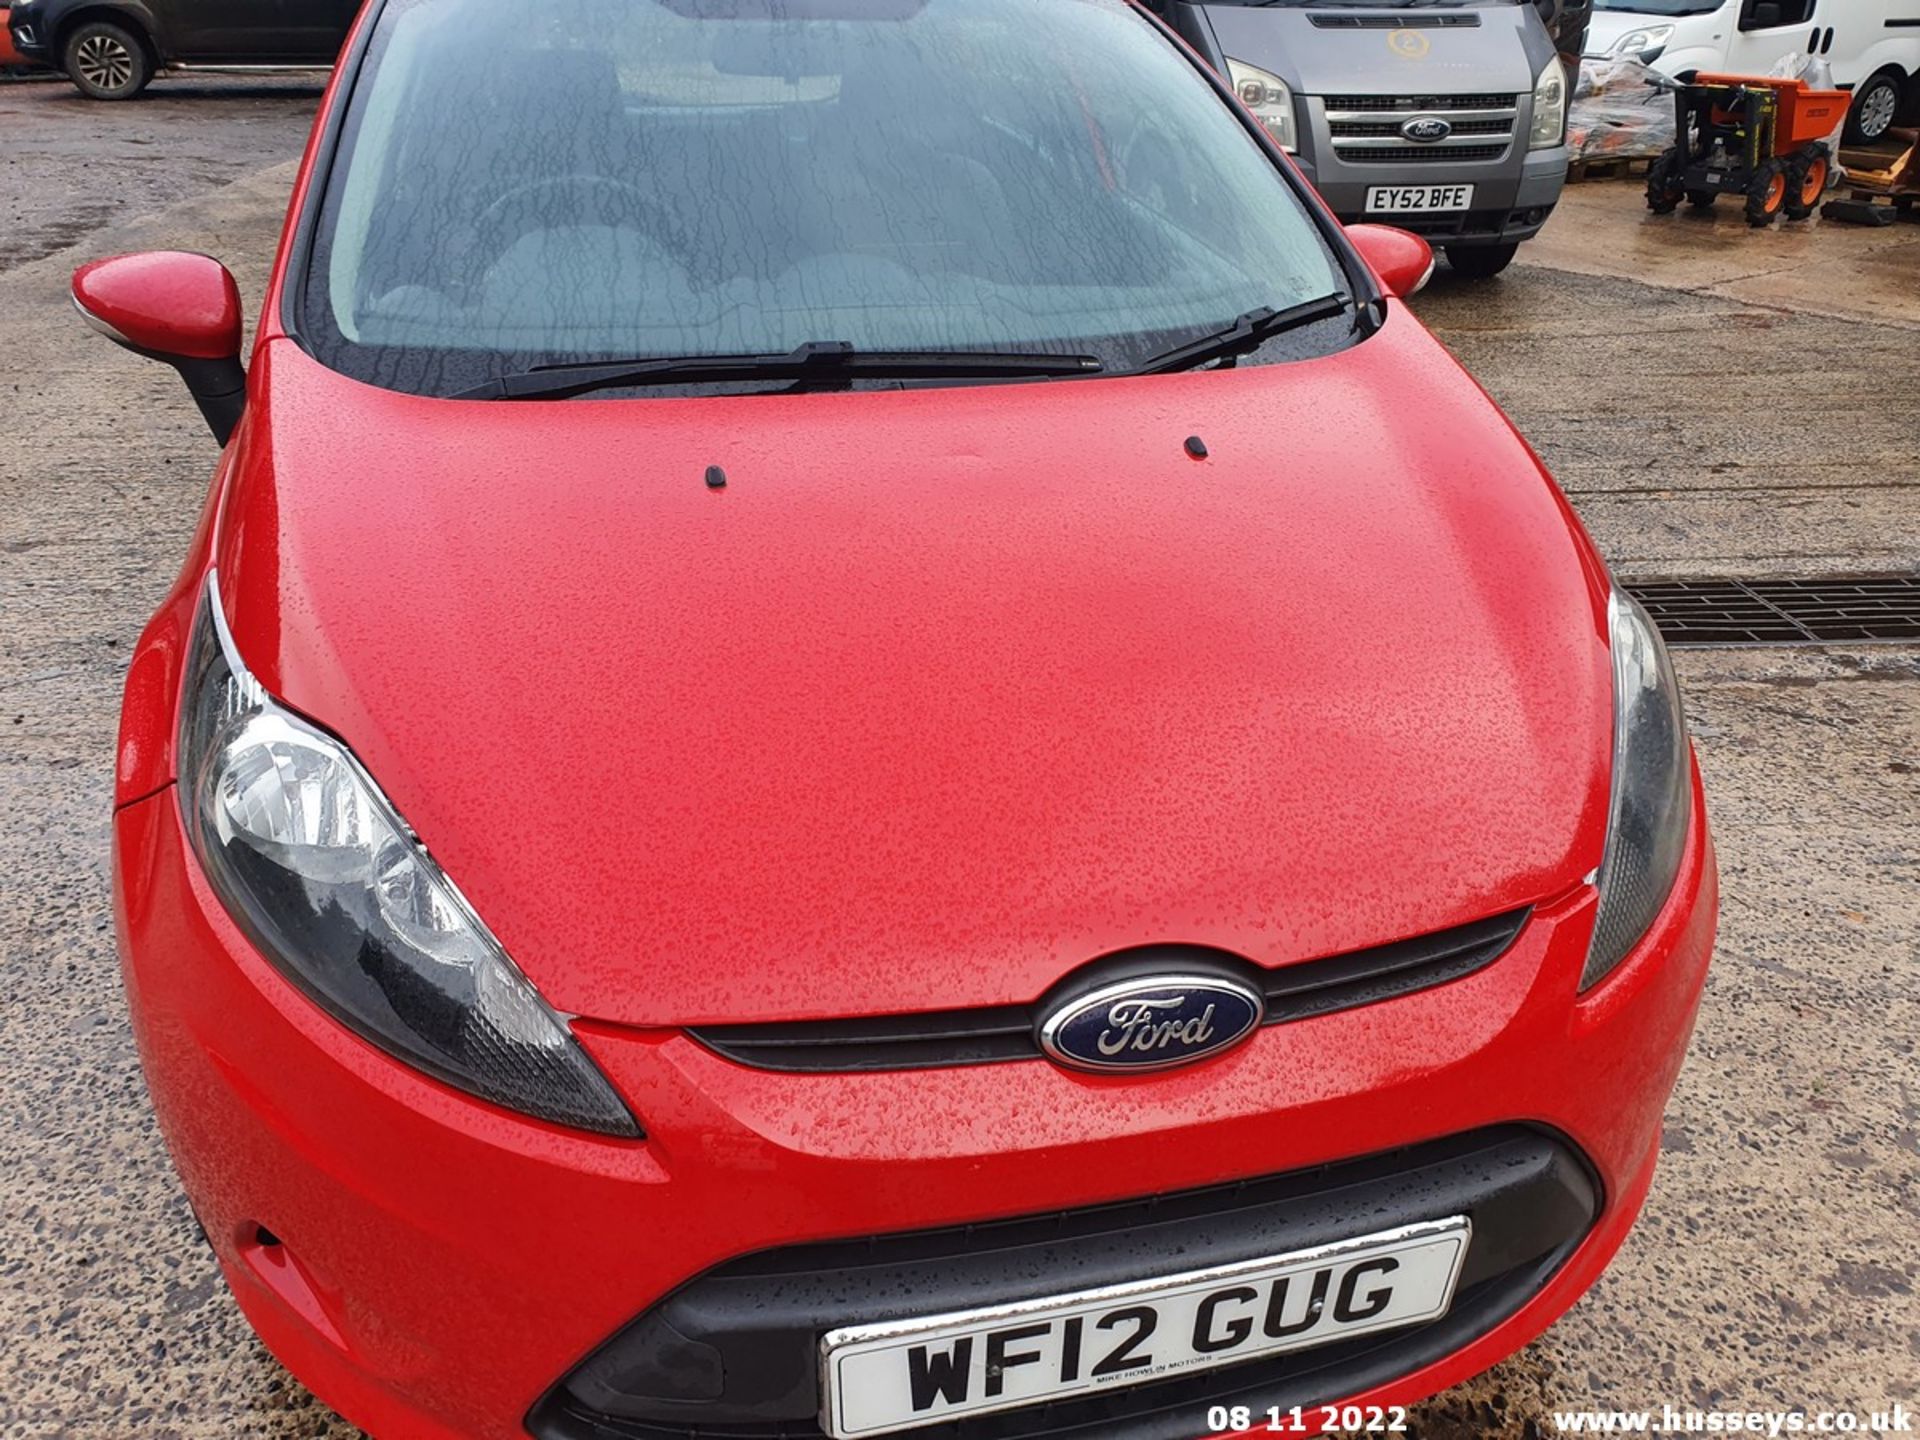 12/12 FORD FIESTA EDGE ECONETIC II T - 1560cc 5dr Hatchback (Red, 173k) - Image 39 of 59